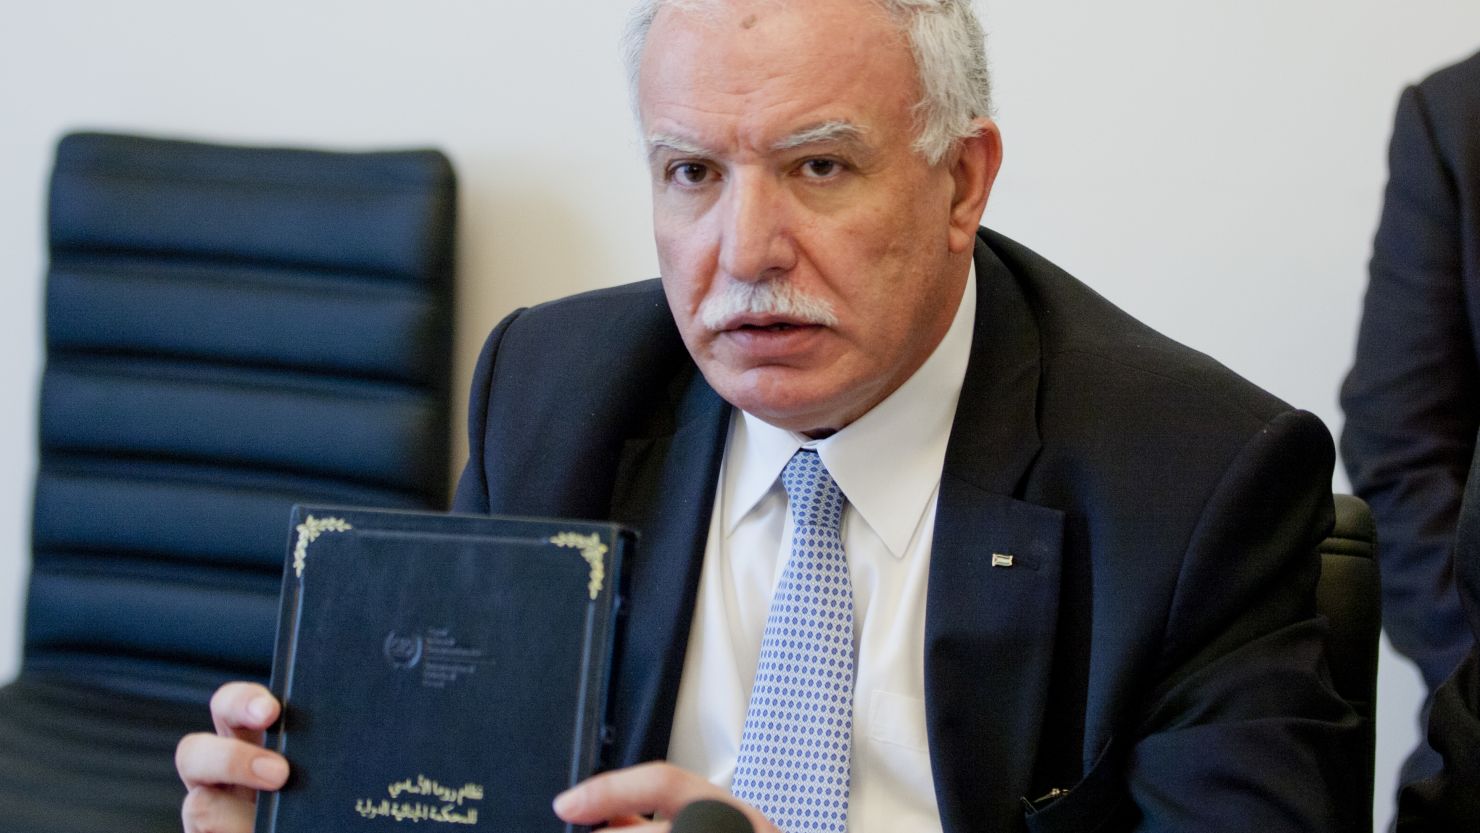 Palestinian Foreign Minister Riad Malki participates in a ceremony marking Palestinian membership in the International Criminal Court in The Hague, Netherlands, Wednesday, April 1, 2015. 